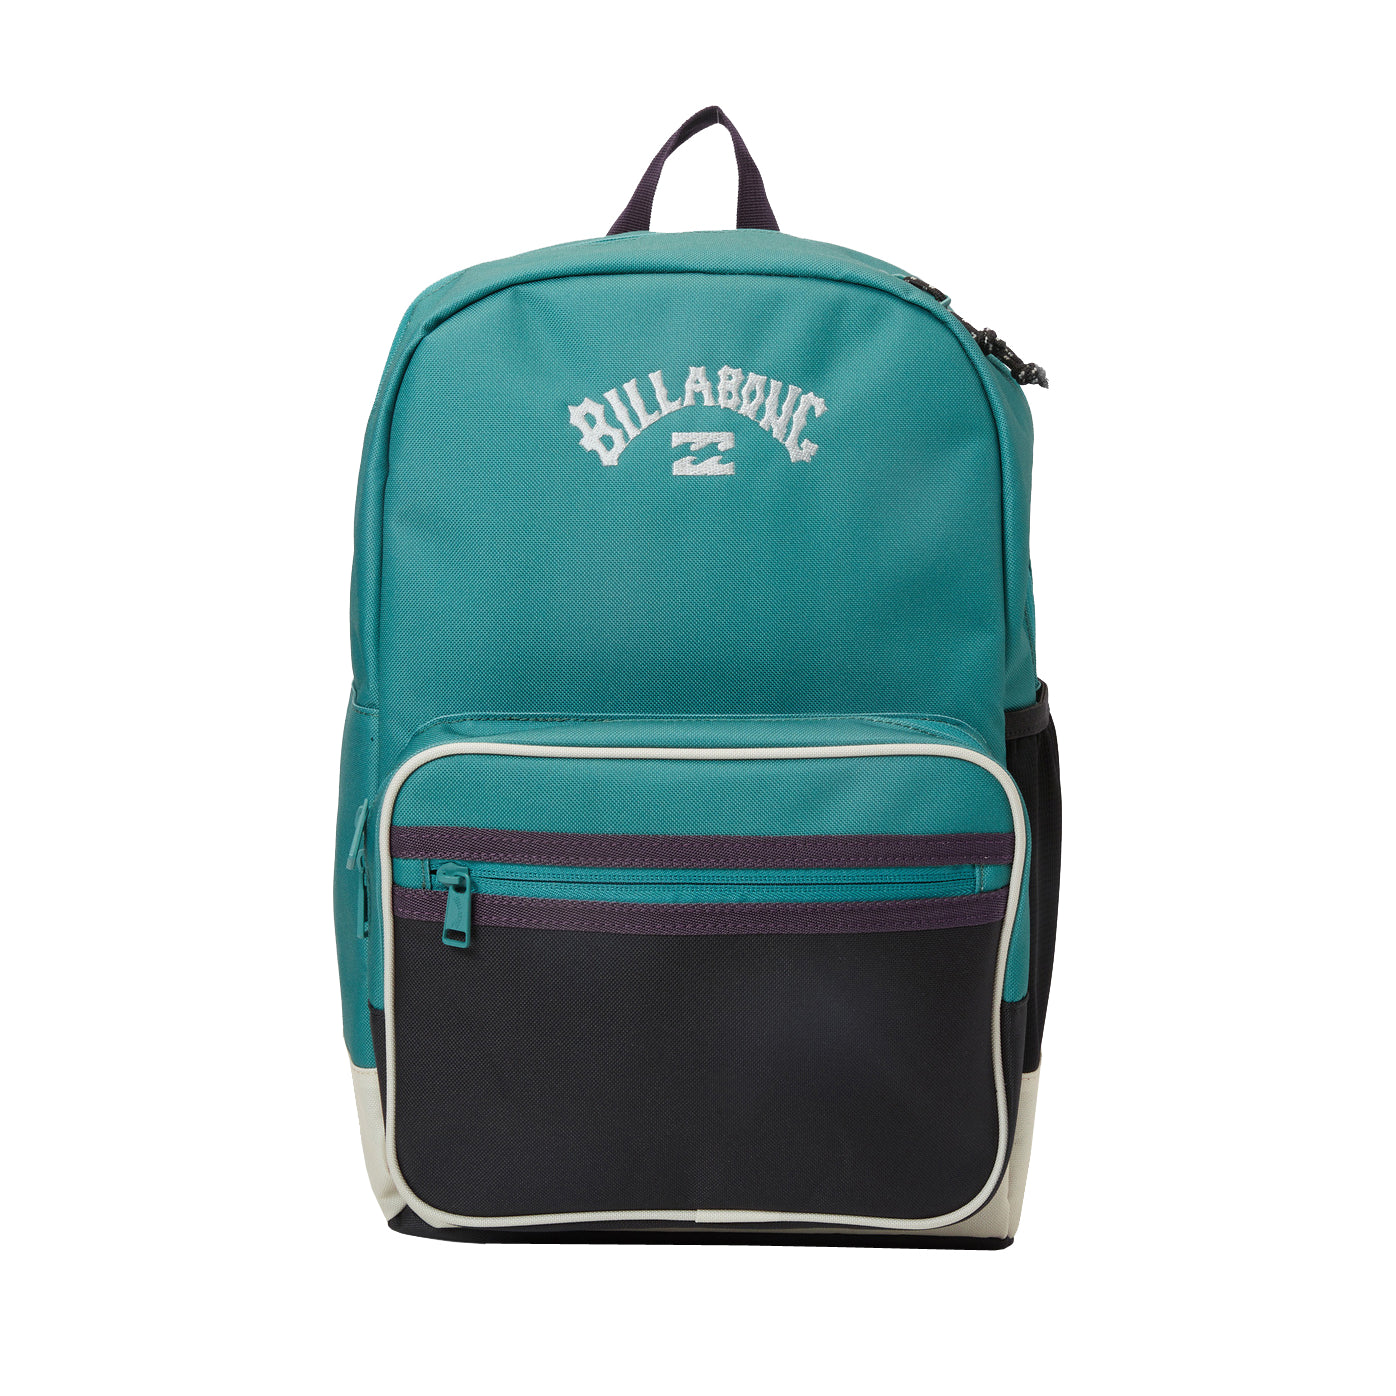 Billabong All Day Plus Backpack PAC OS